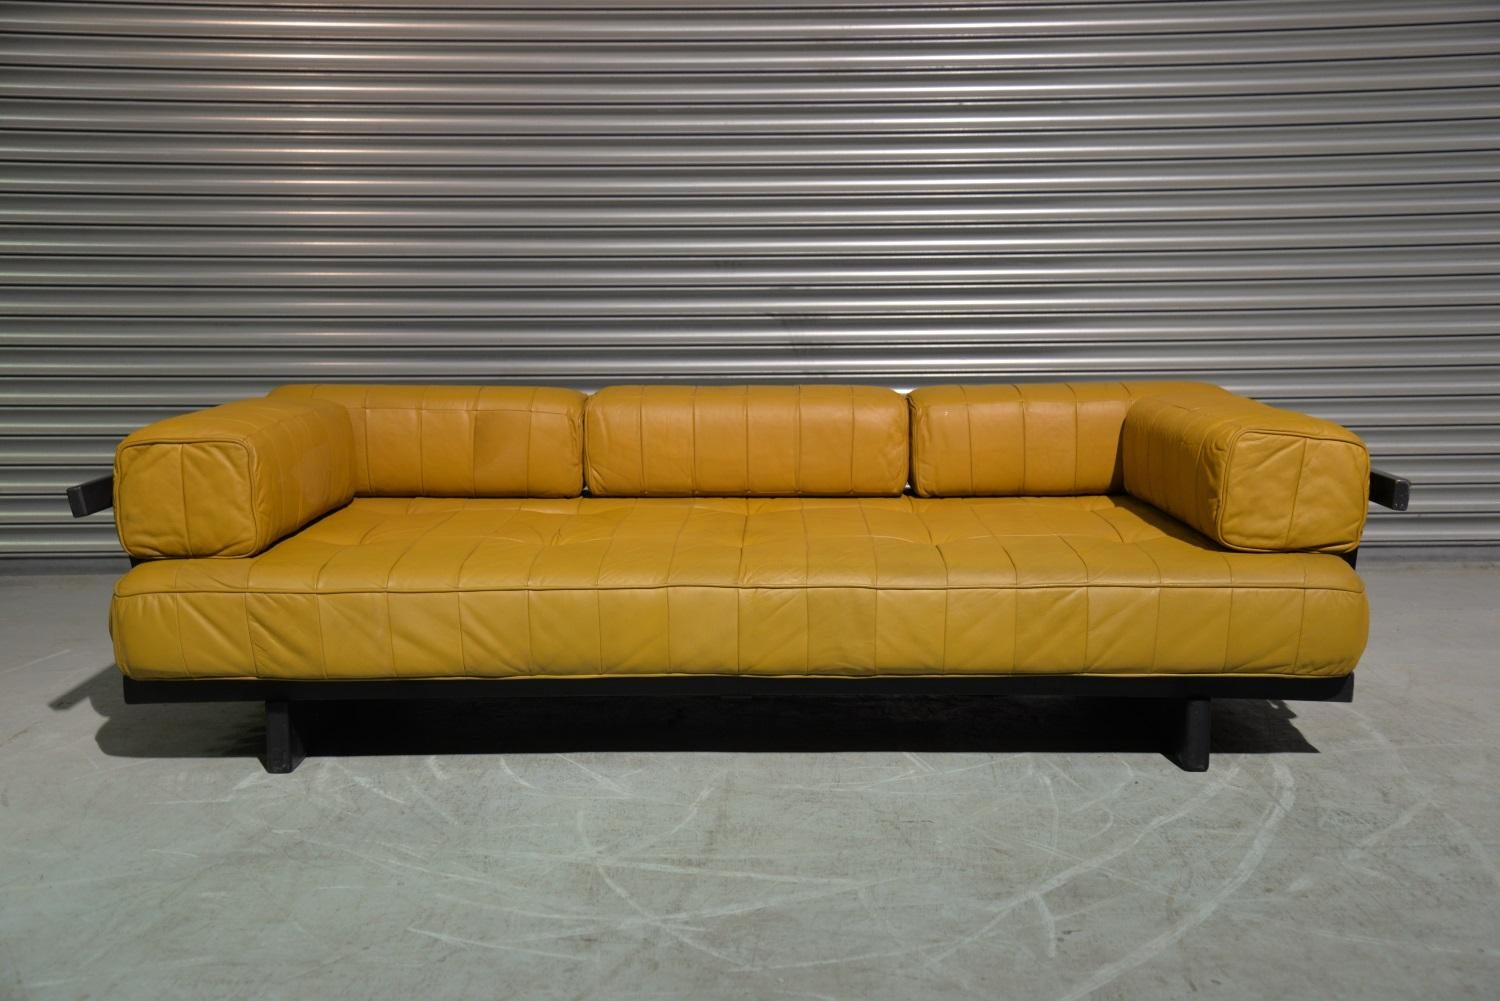 Discounted airfreight for our US and International Customers ( from 2 weeks door to door)

We are delighted to bring to you an extremely rare De Sede DS 80 patchwork leather daybed with full set of bolster patchwork cushions. Built in the 1960s to